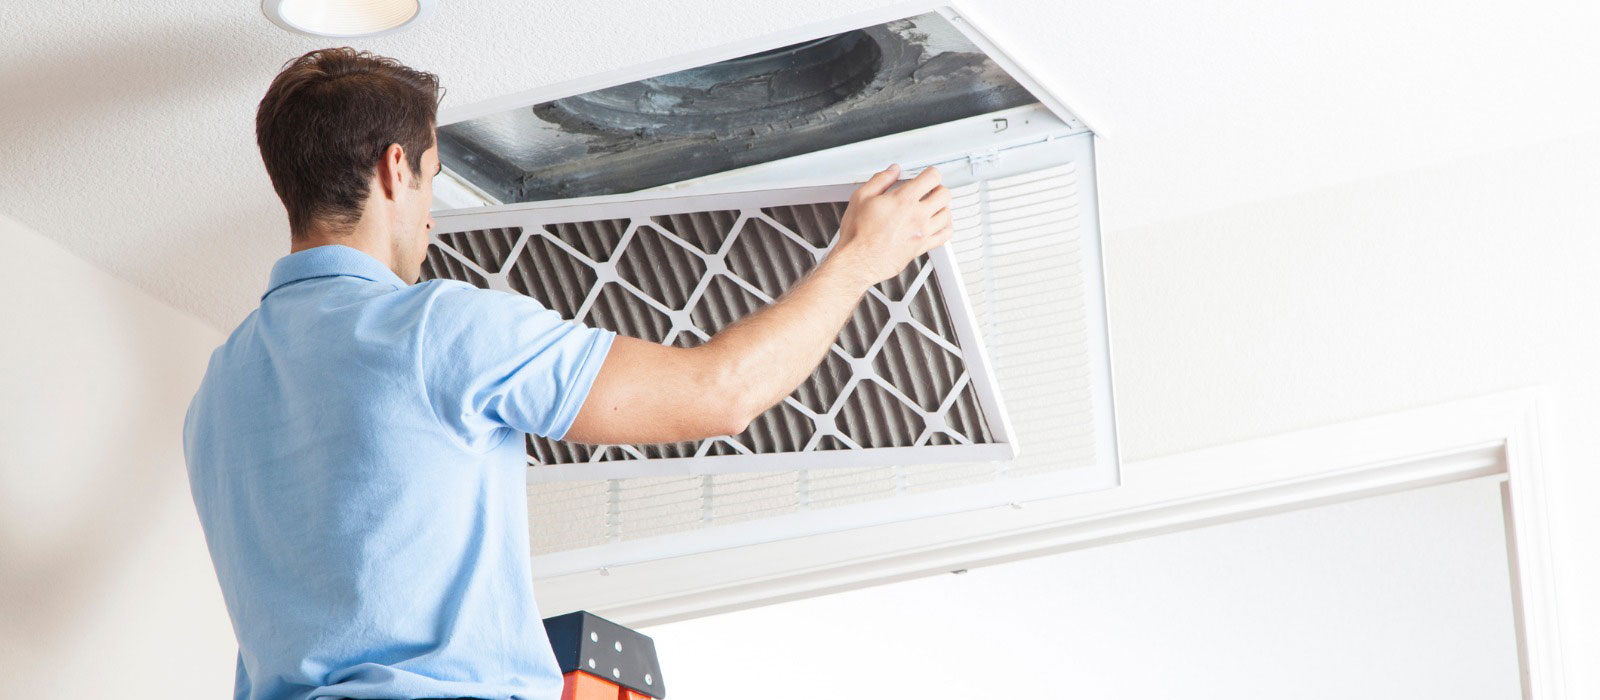 Media Filters vs. HEPA Filters vs. Electronic Air Purifiers